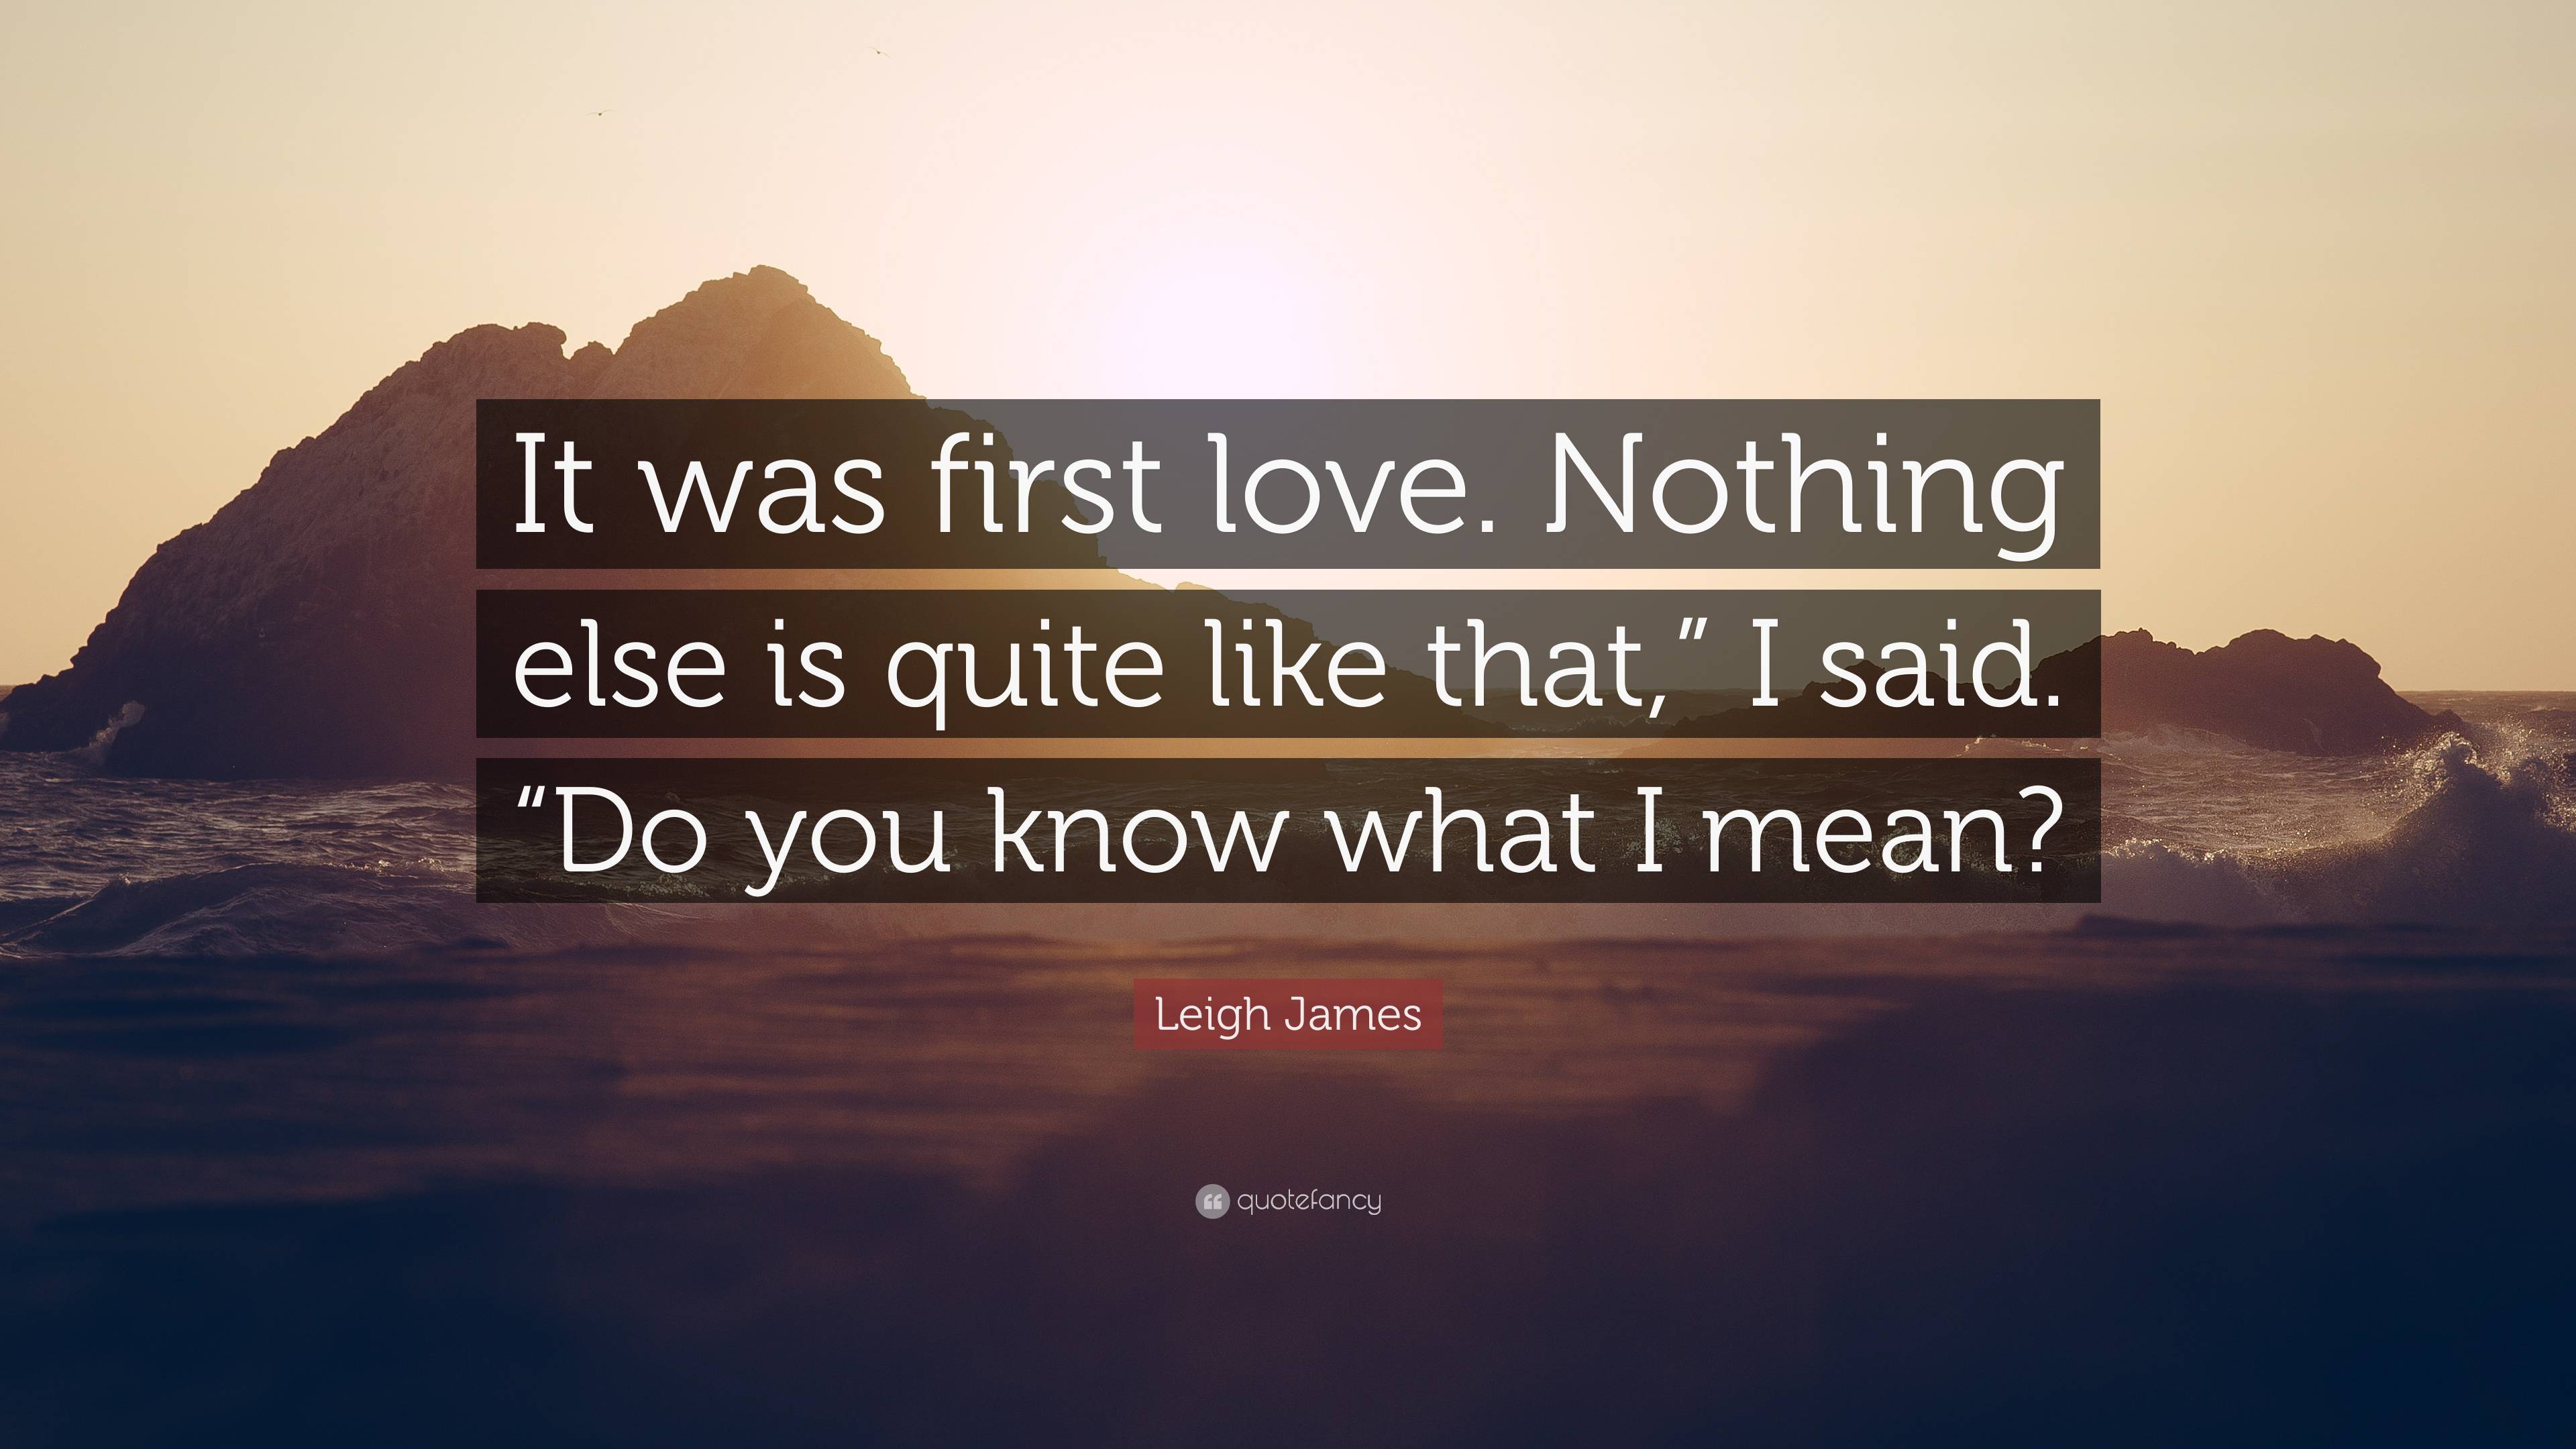 Leigh James Quote: “It was first love. Nothing else is quite like that ...